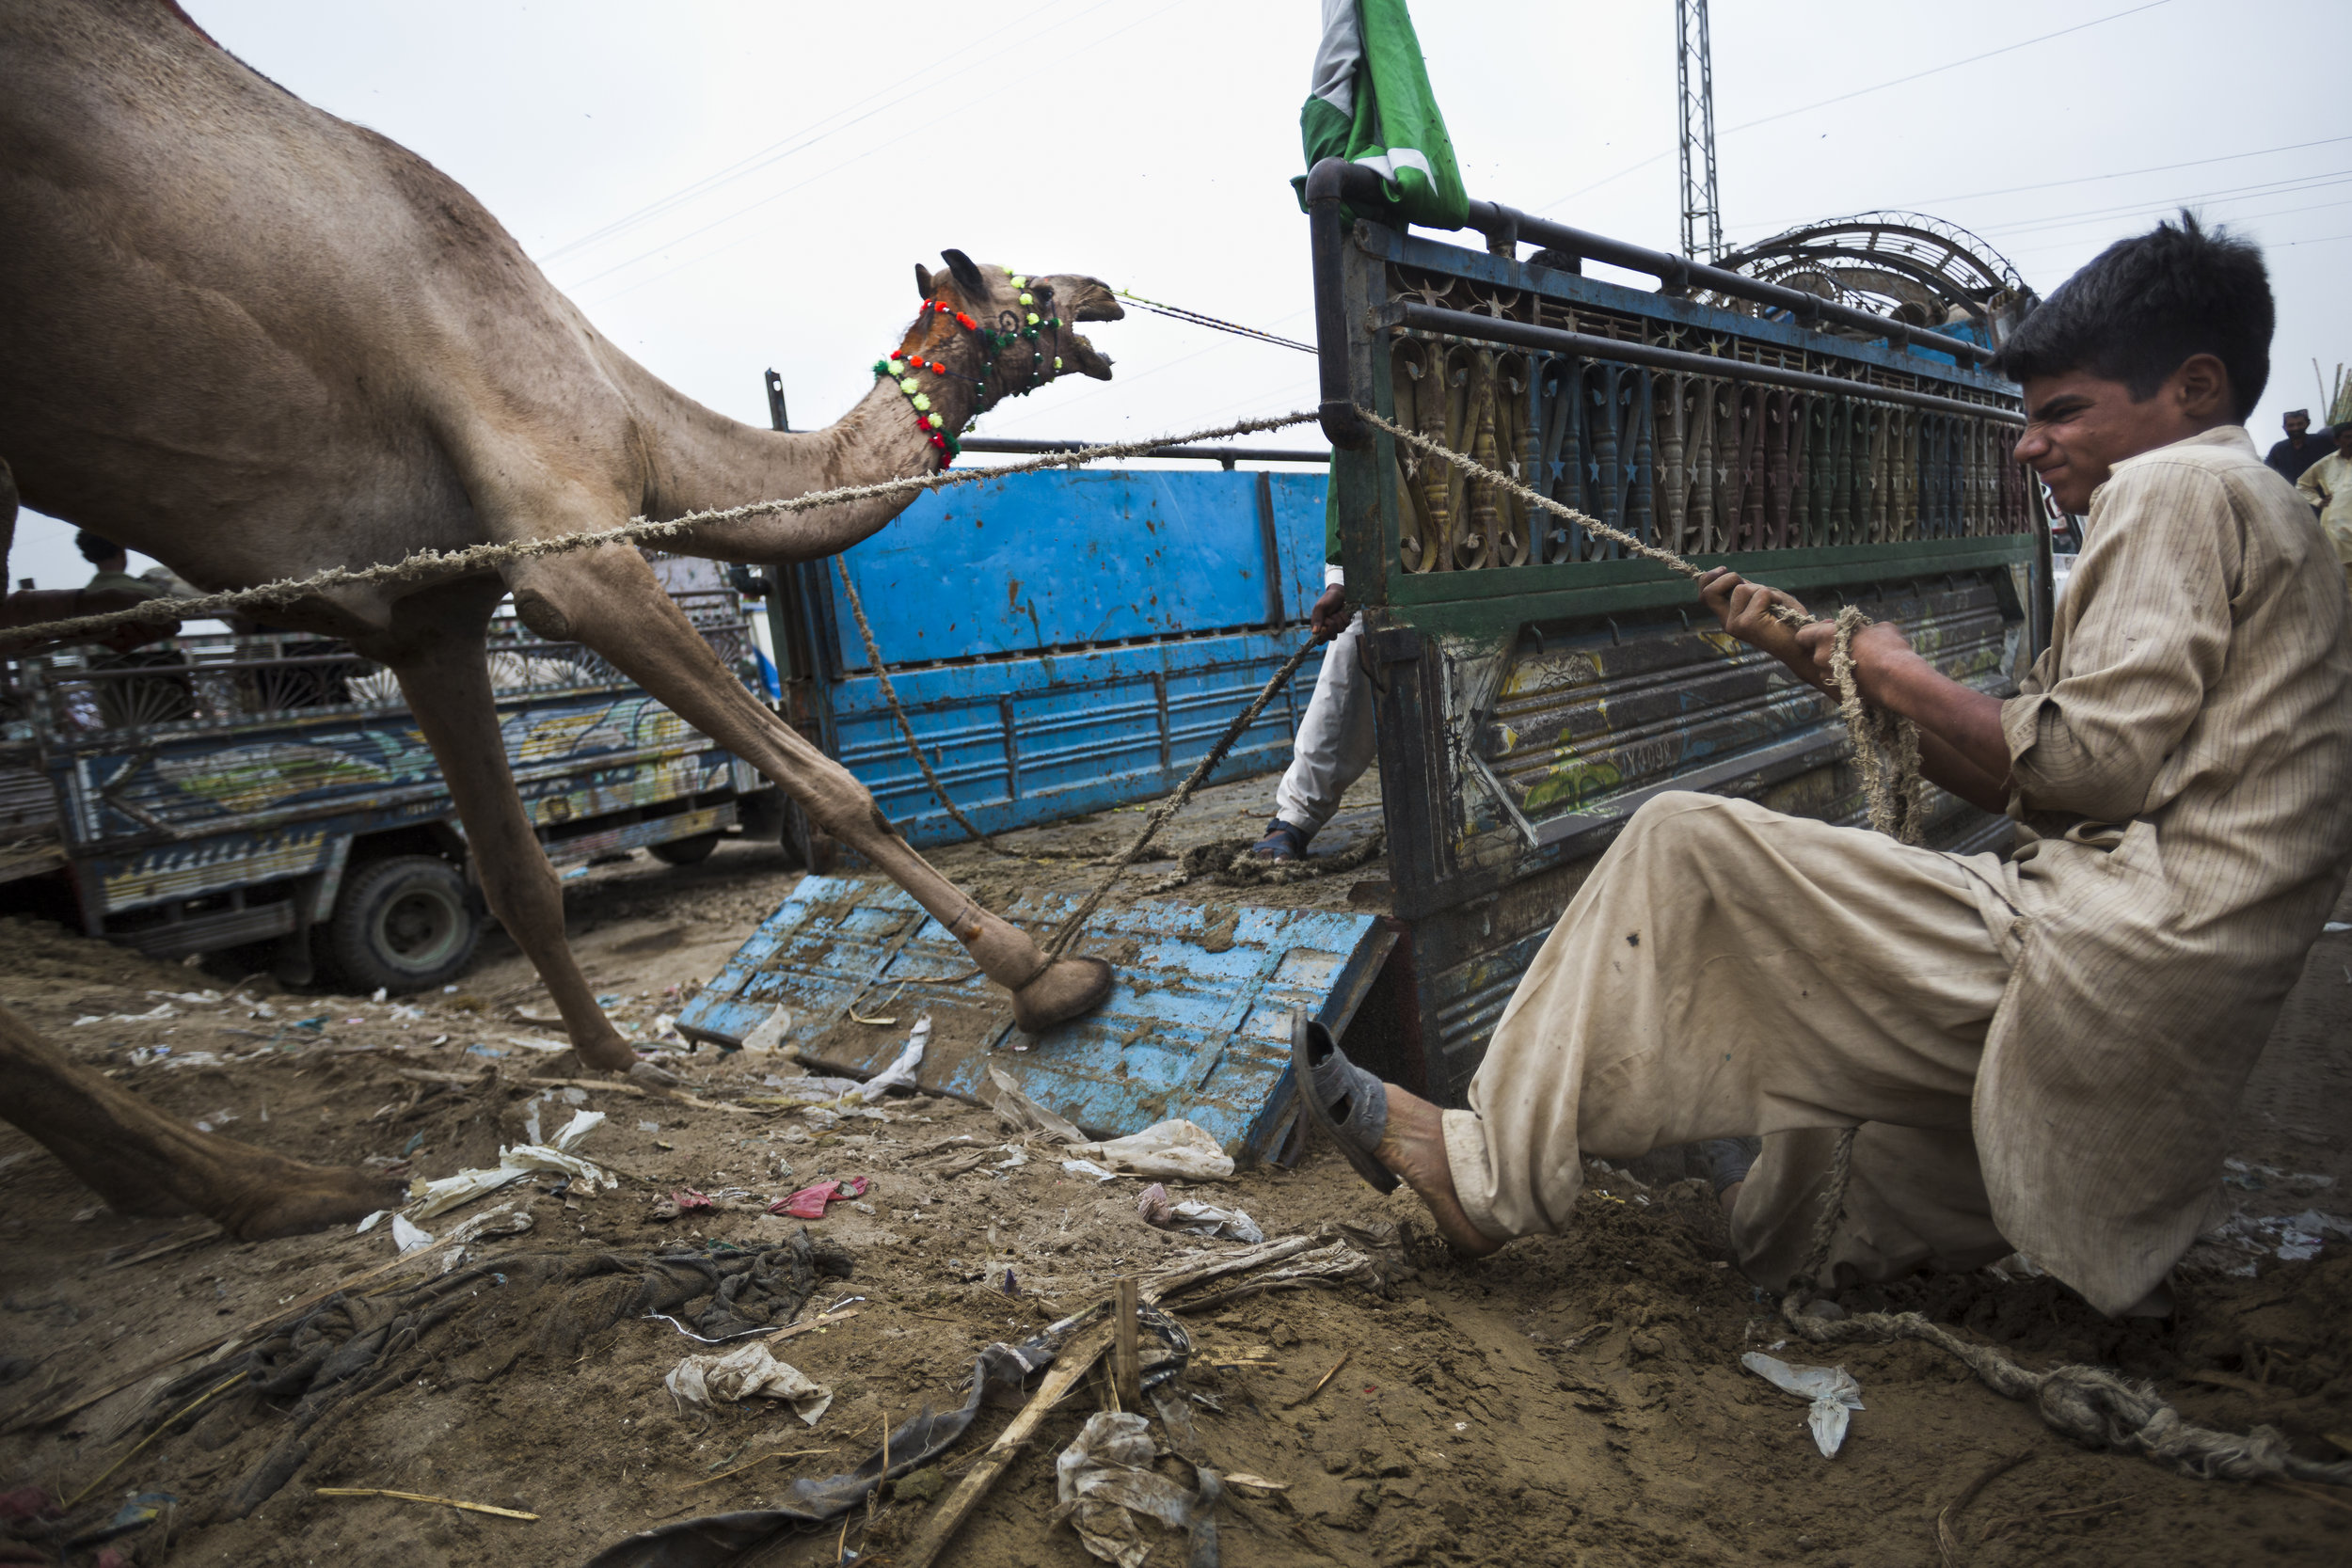  A boy wrangles a camel at a 'mandi,' in Karachi, Pakistan on Friday Aug 9, 2019. Mandis are pop up animal markets where customers browse and purchase goats, sheep, cows, or camels for sacrificial slaughter for the Muslim celebration Eid al-Adha. Muc